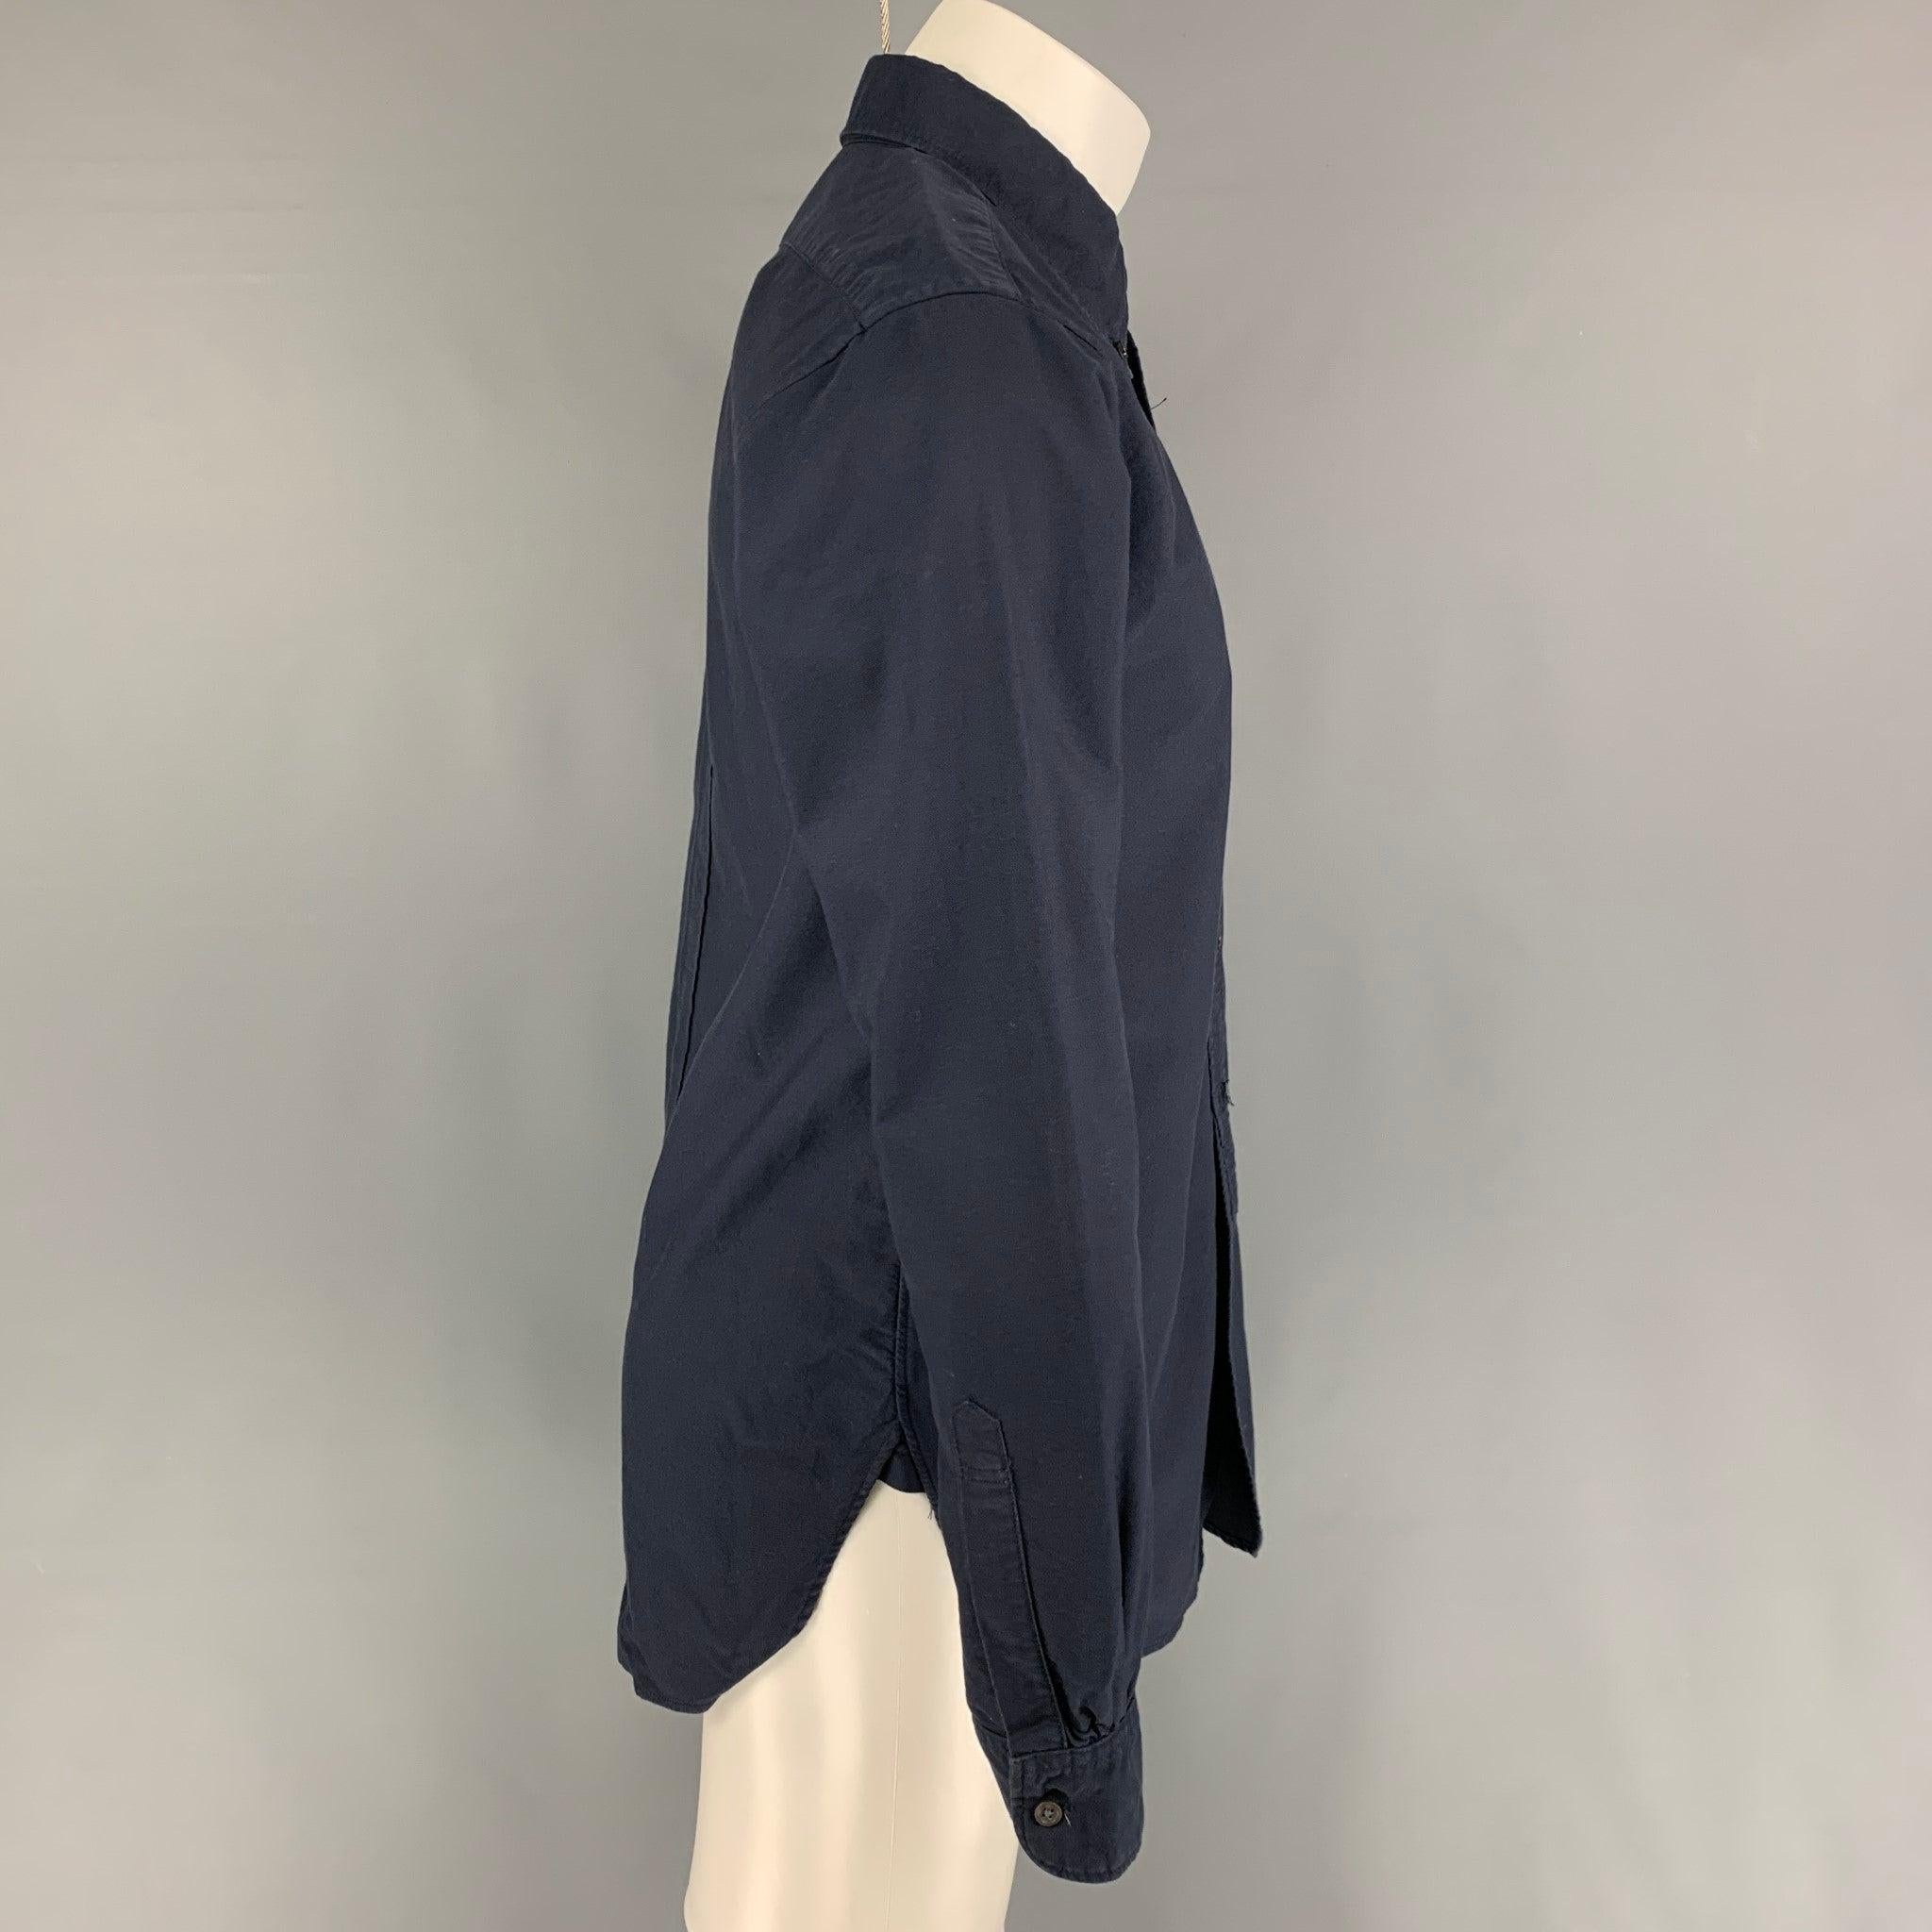 ENGINEERED GARMENTS long sleeve shirt comes in a navy cotton featuring a button down collar, patch pocket, and a button up closure. Made in USA. Very Good
Pre-Owned Condition. 

Marked:   M  

Measurements: 
 
Shoulder: 18 inches  Chest: 40 inches 